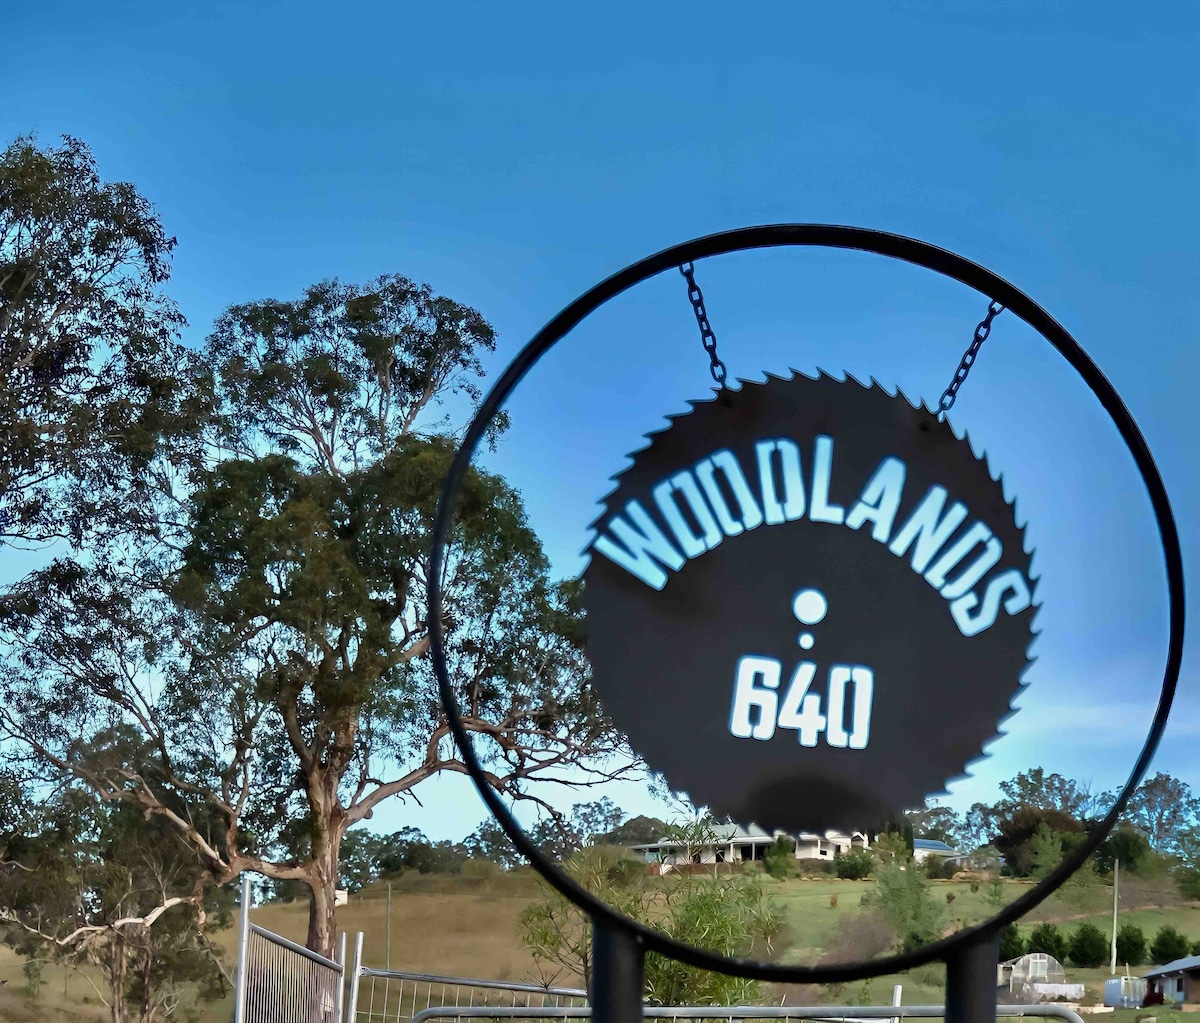 An authentic farm stay located in rural NSW.